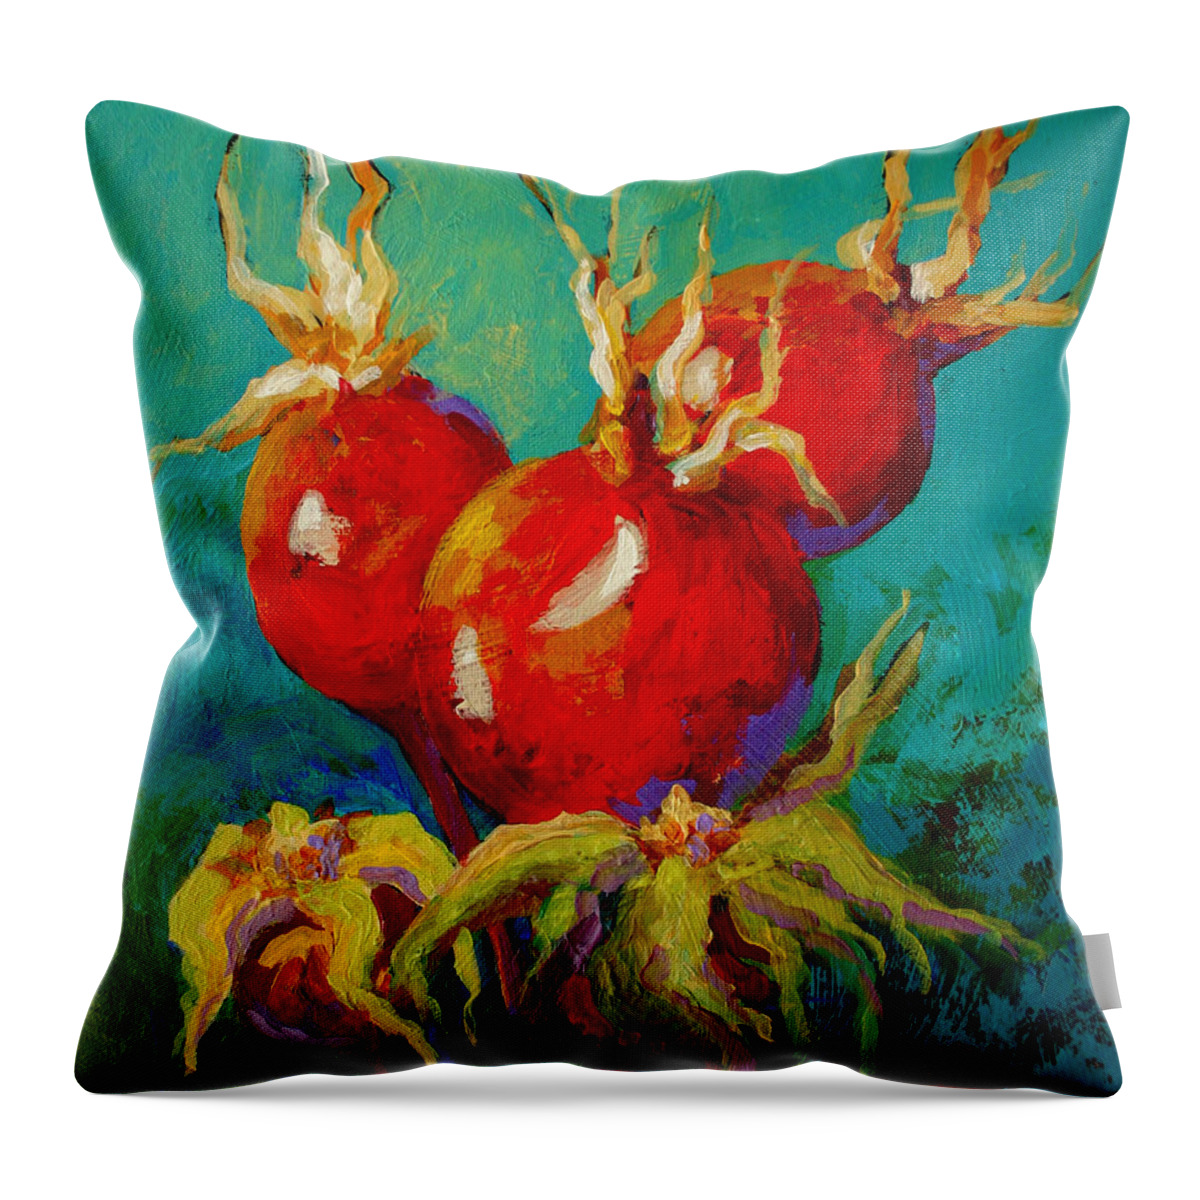 Floral Throw Pillow featuring the painting Rose Hips by Marion Rose